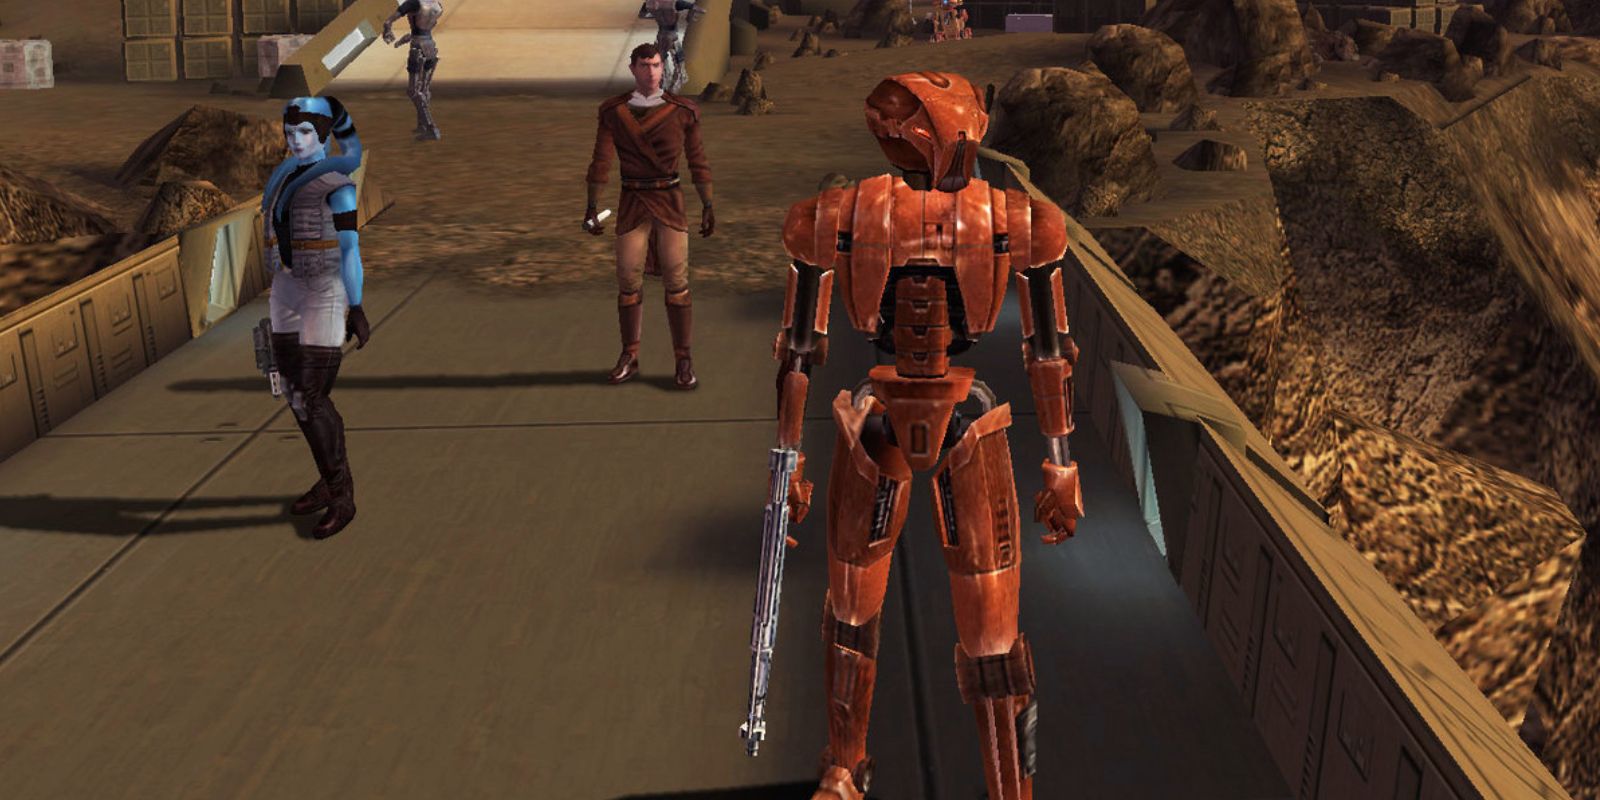 Every Major KOTOR Reference In Star Wars The Old Republic